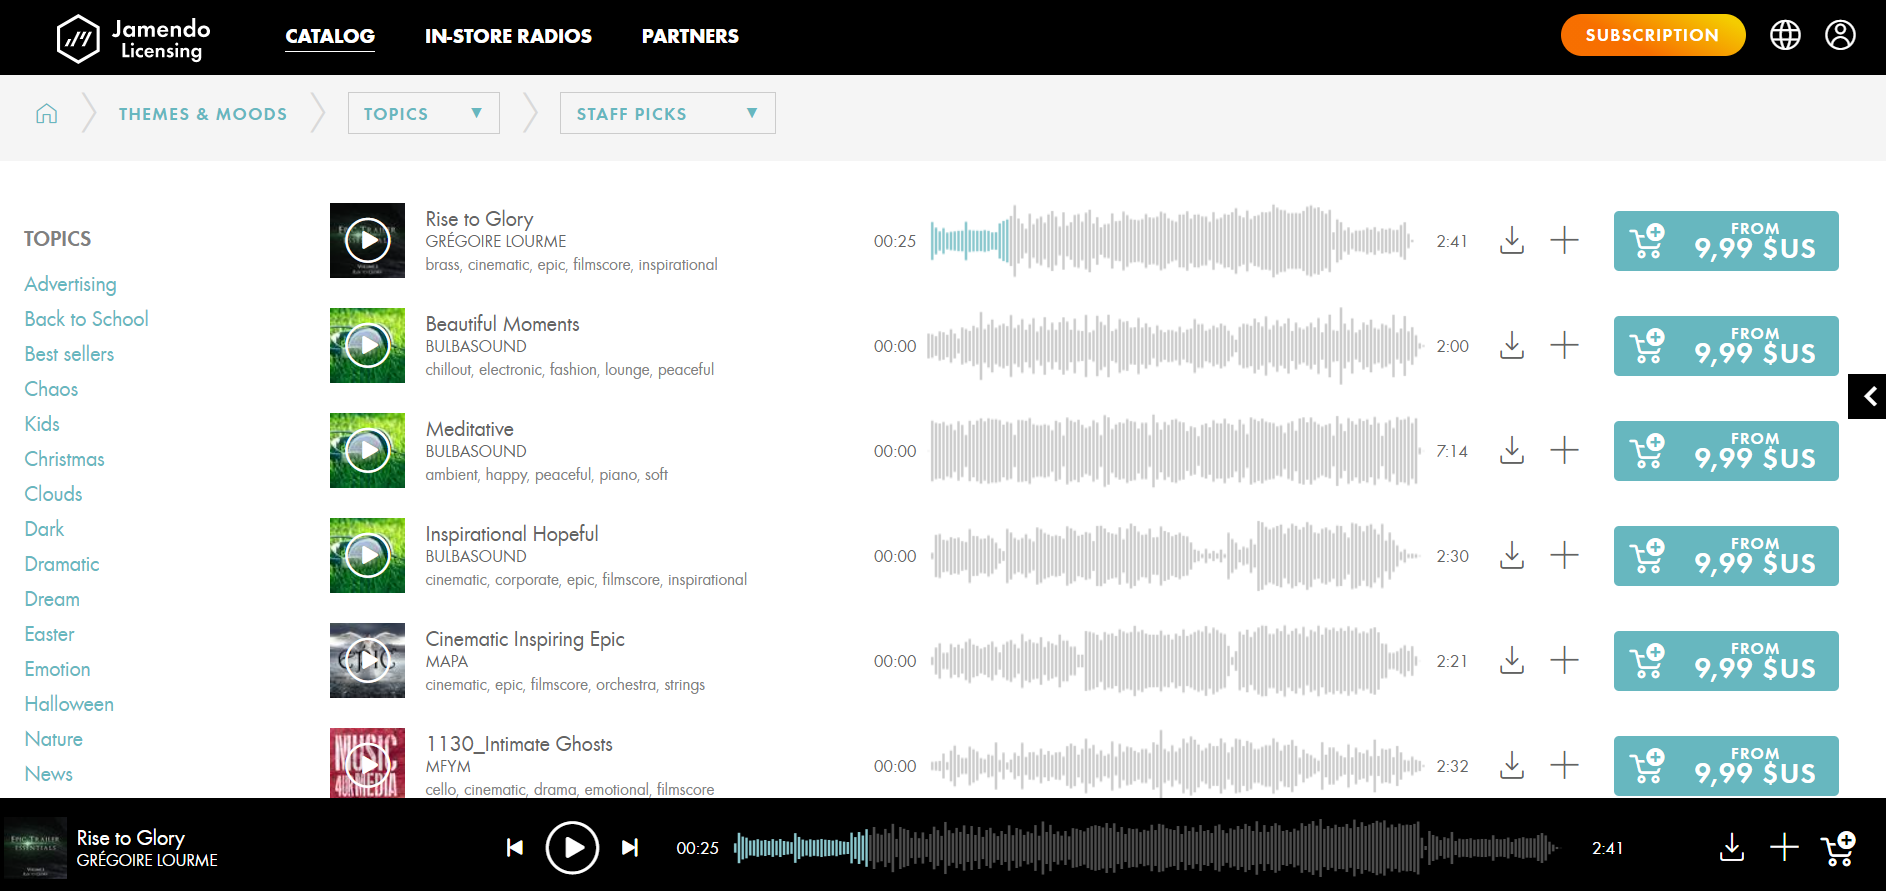 Jamendo is great place to find good background music for videos. The interface has a well catalogued music items. 